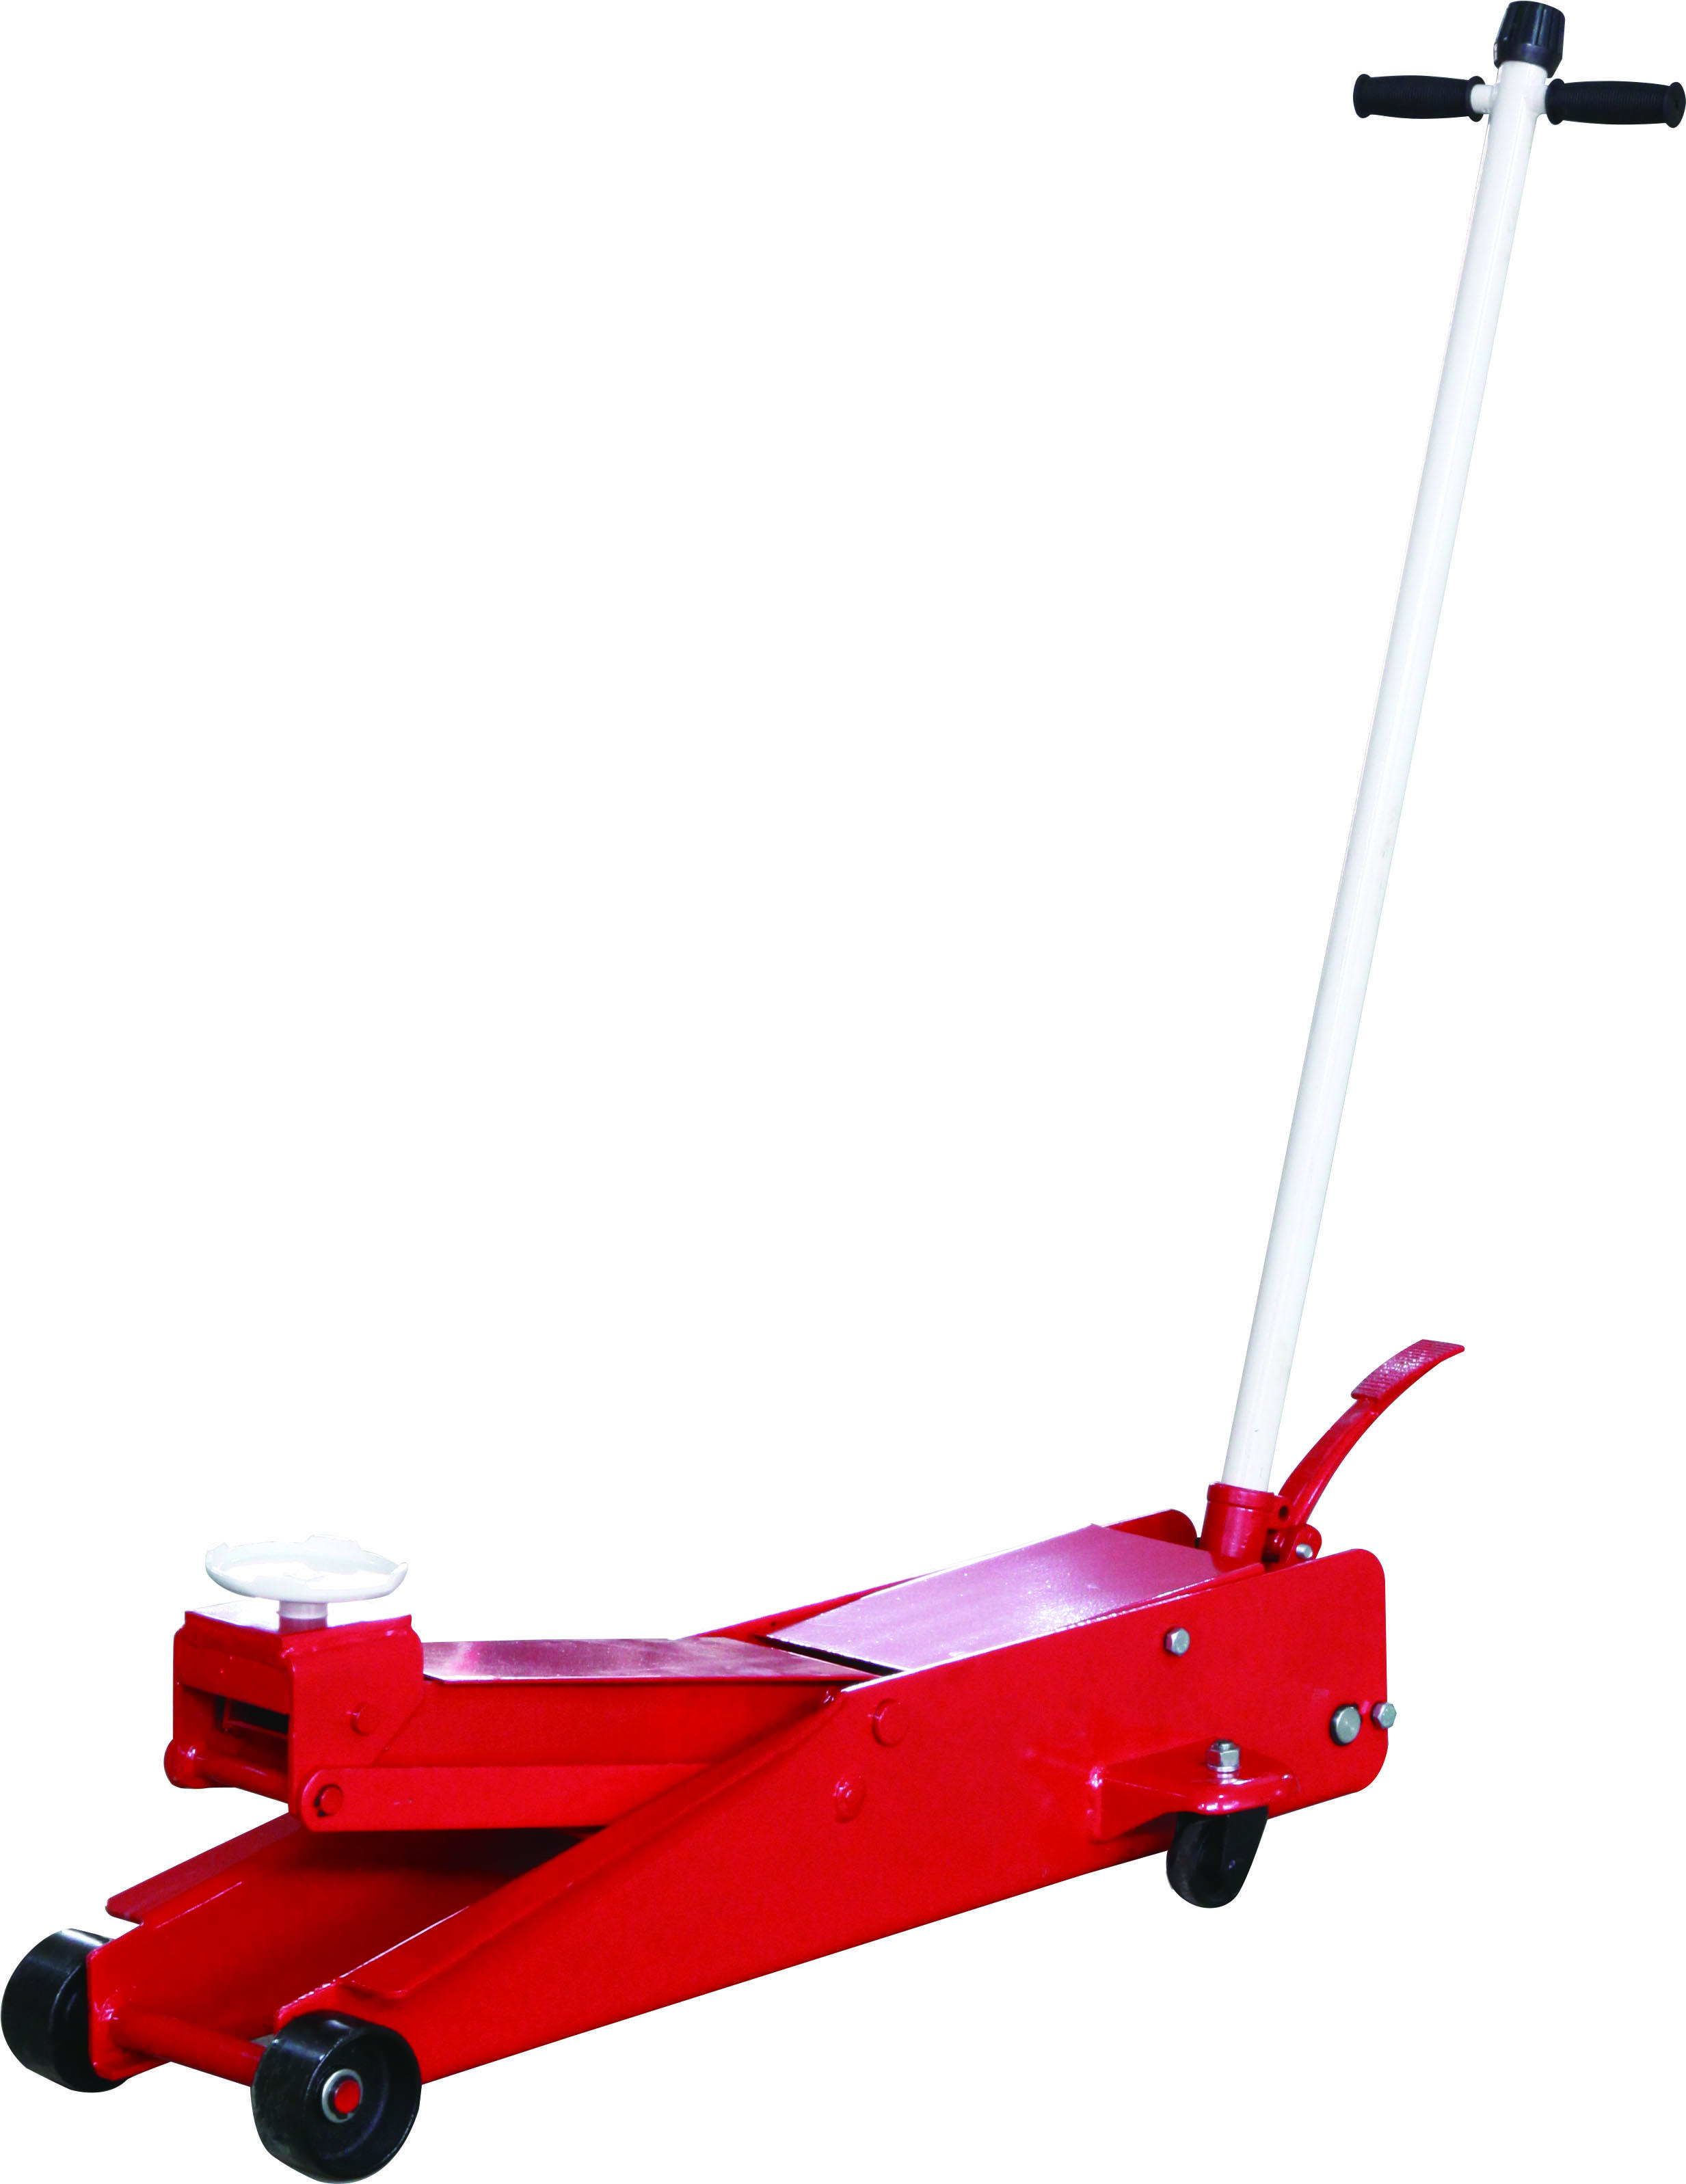 LONG CHASSIS SERVICE JACK